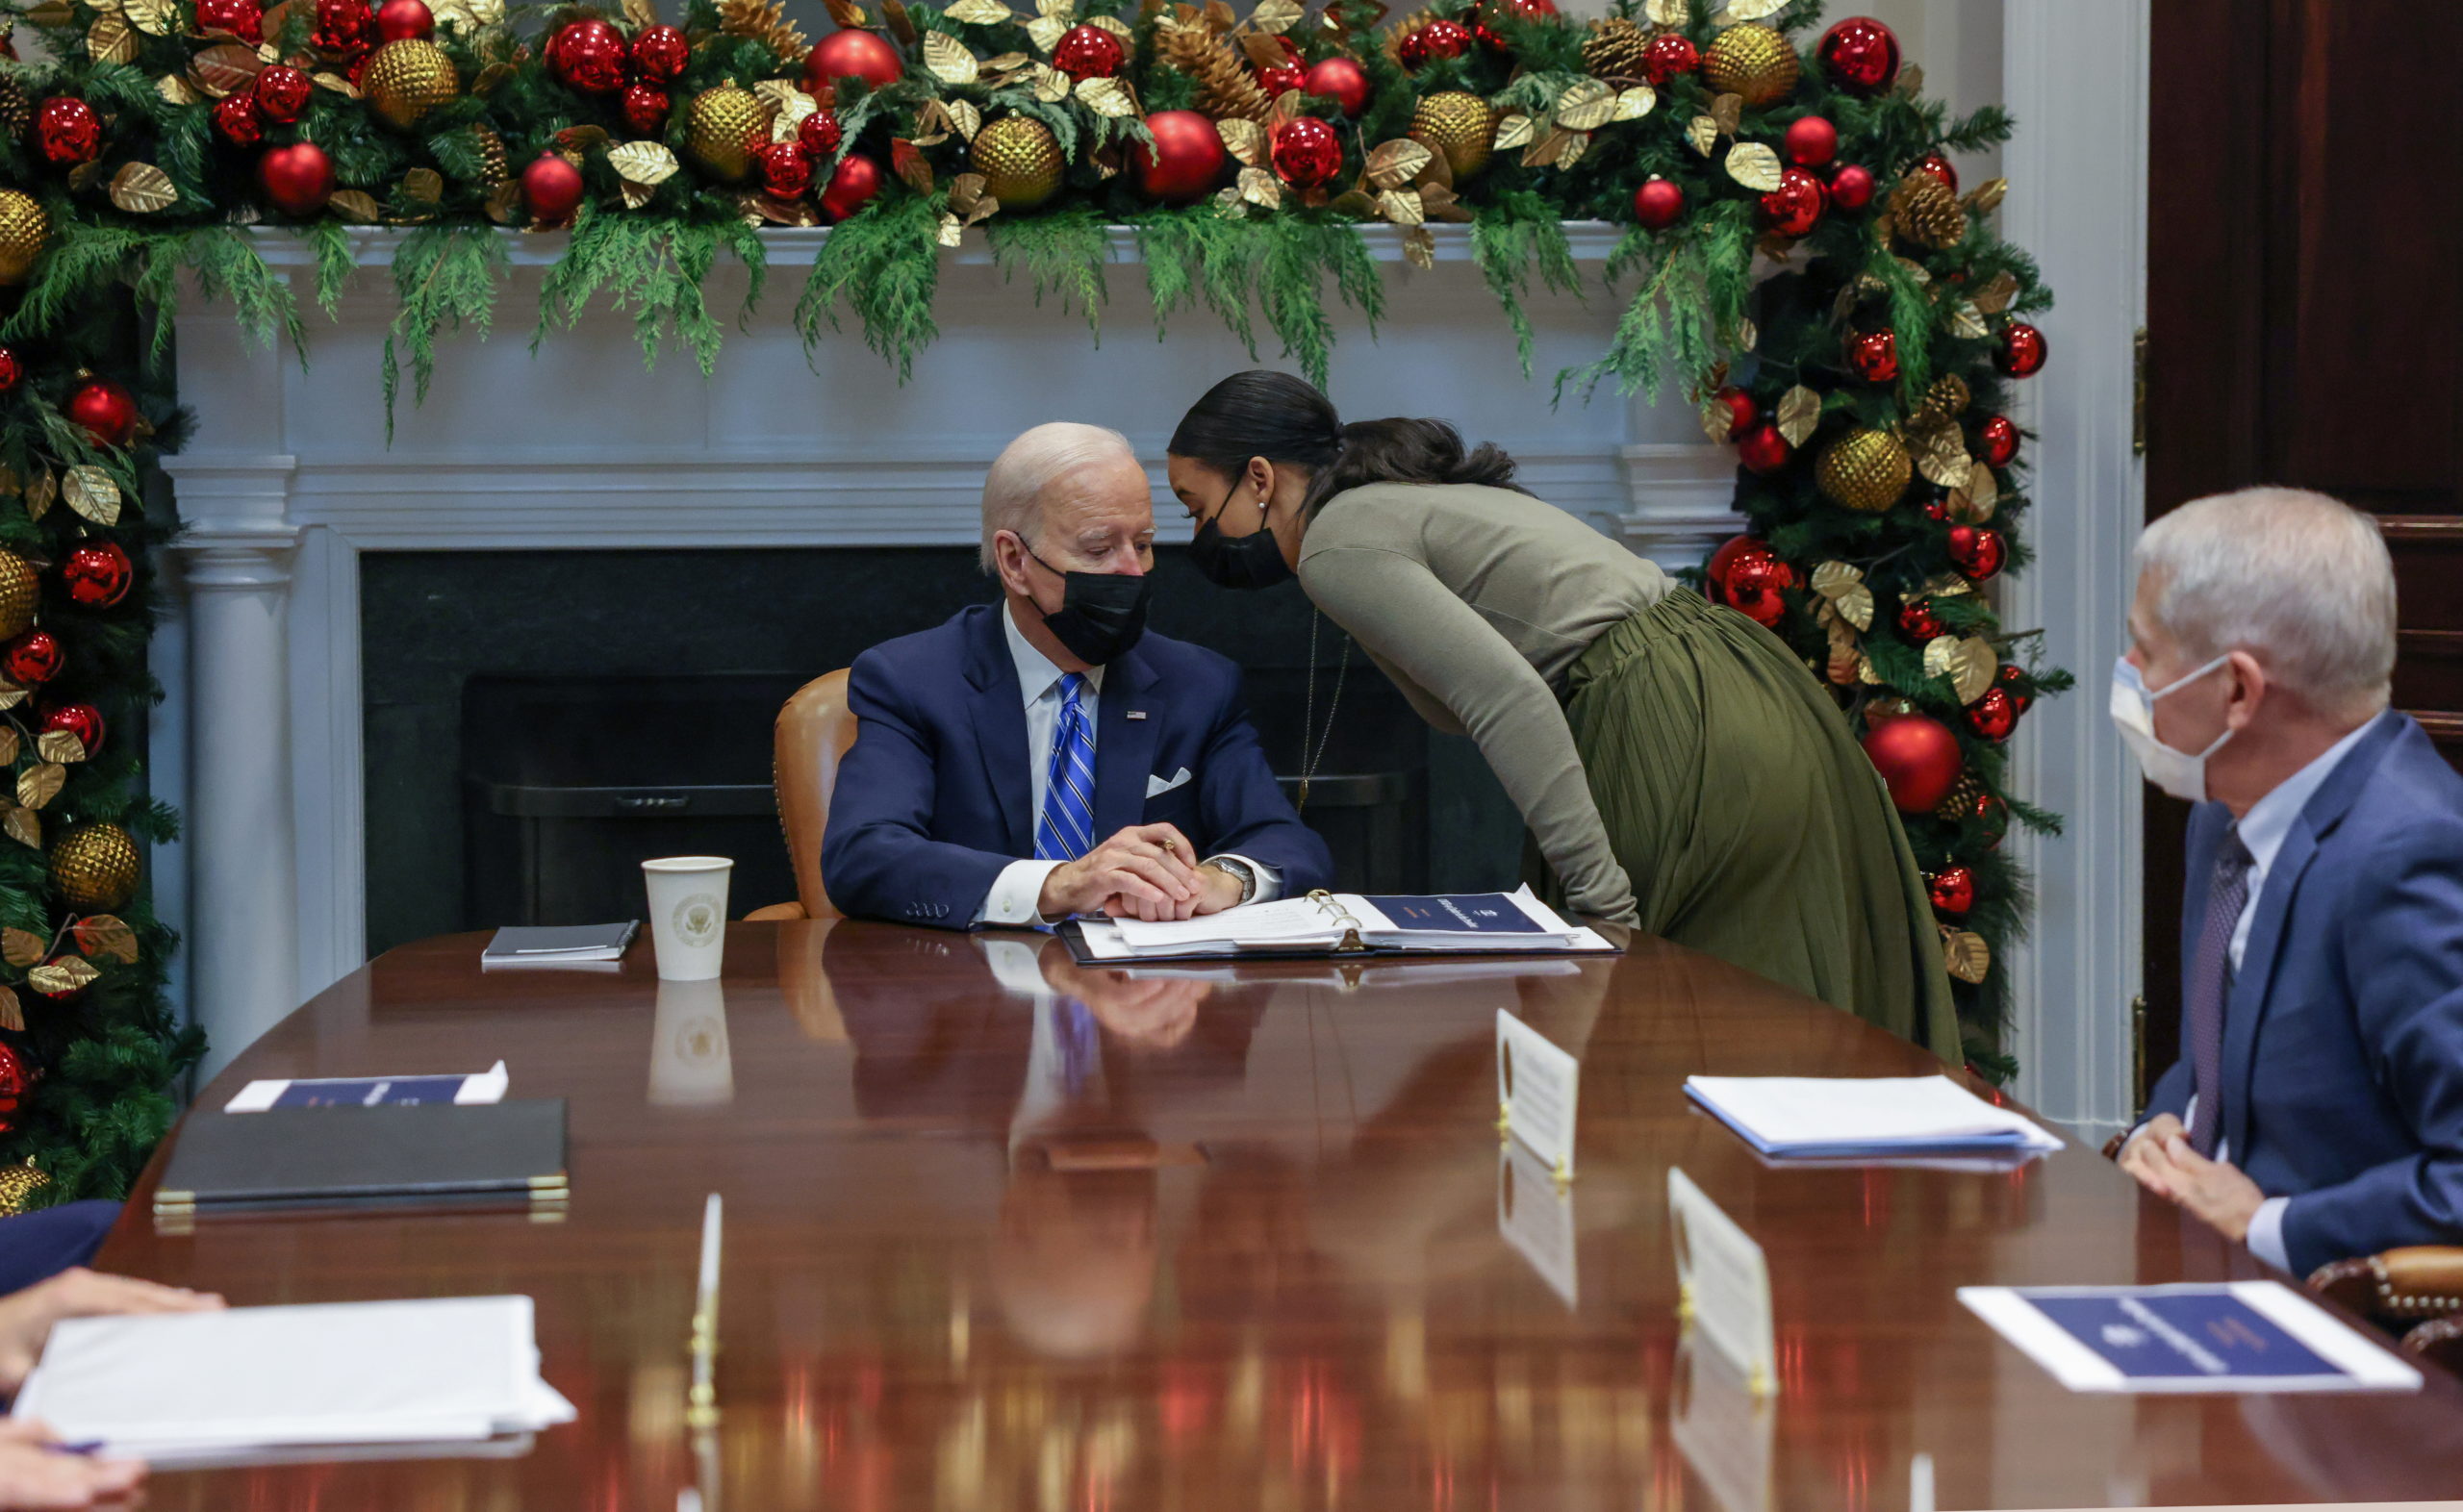 U.S. President Joe Biden gets a message from an aide during a meeting with his White House COVID-19 Response Team on the latest developments related to the Omicron variant in the Roosevelt Room in the White House in Washington, U.S., December 16, 2021. REUTERS/Evelyn Hockstein